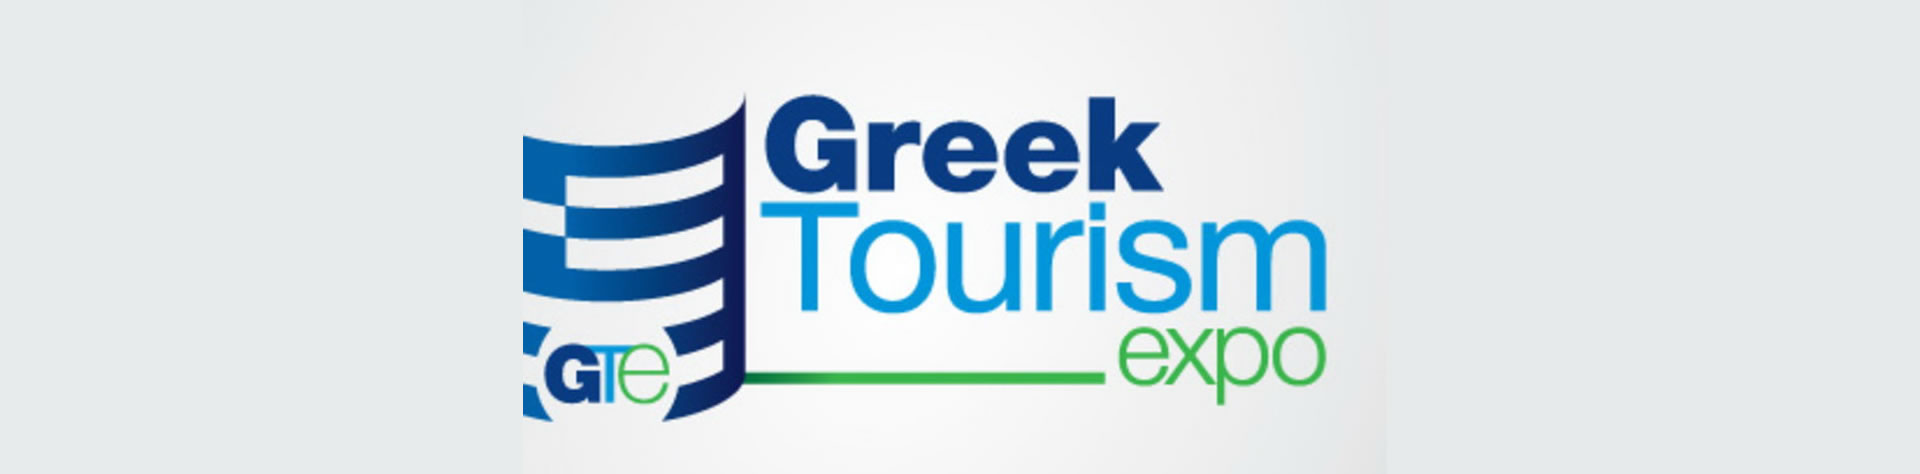 Meet Us at Greek Tourism Expo- Stand D54! 